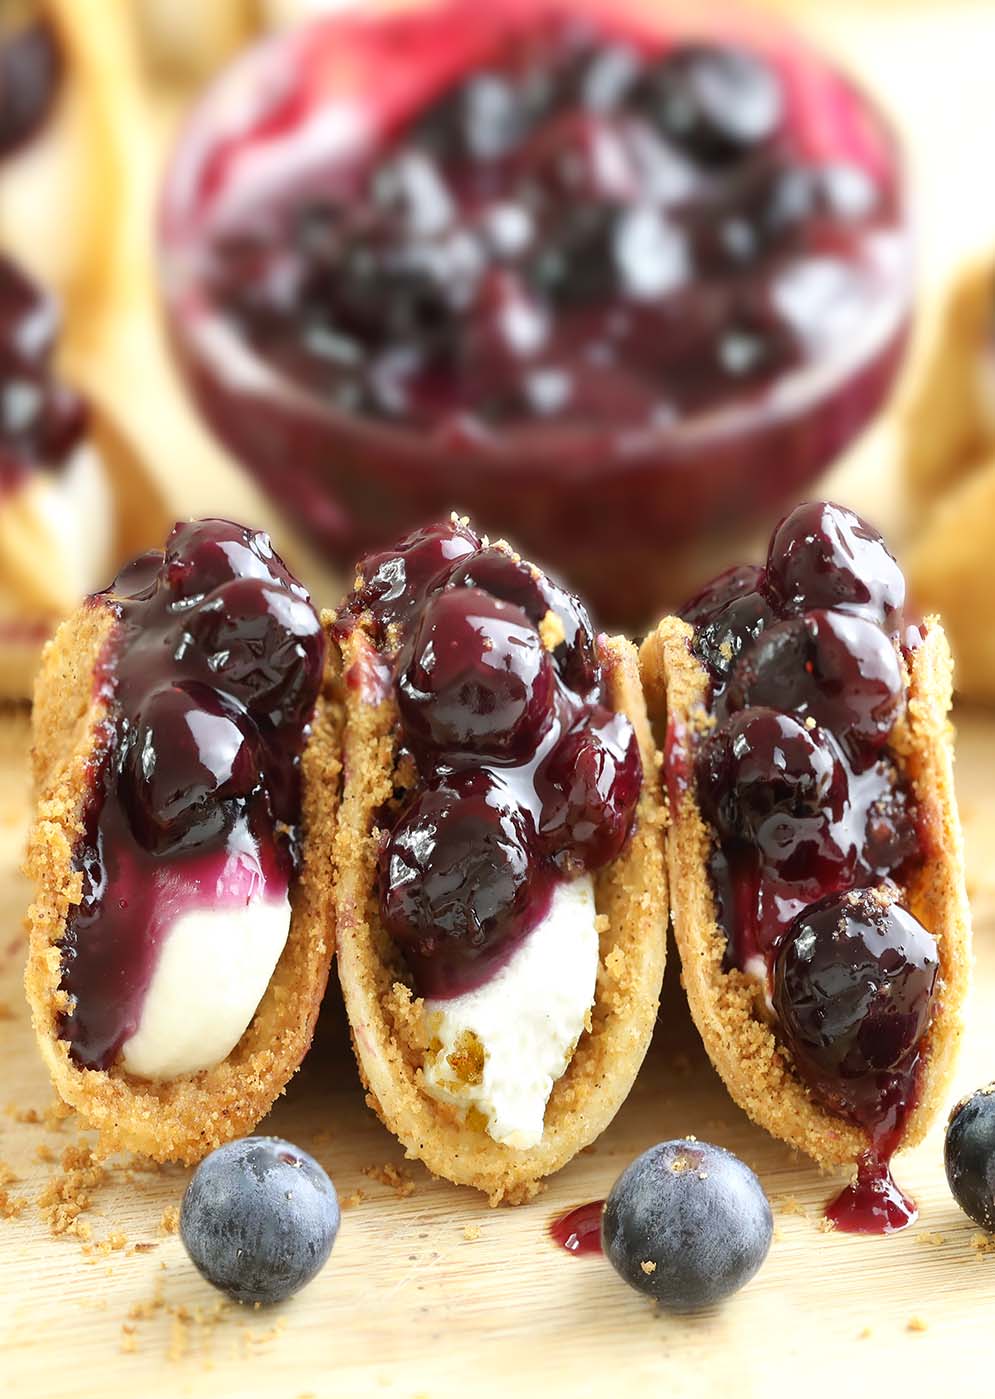 The perfect treat to bring as a party pleaser, and they couldn’t be easier. Crunchy baked tortilla shells, easy cheesecake filling, and homemade blueberry pie topping are simply perfect. You’ll be enjoying this awesome dessert in about 30 minutes.